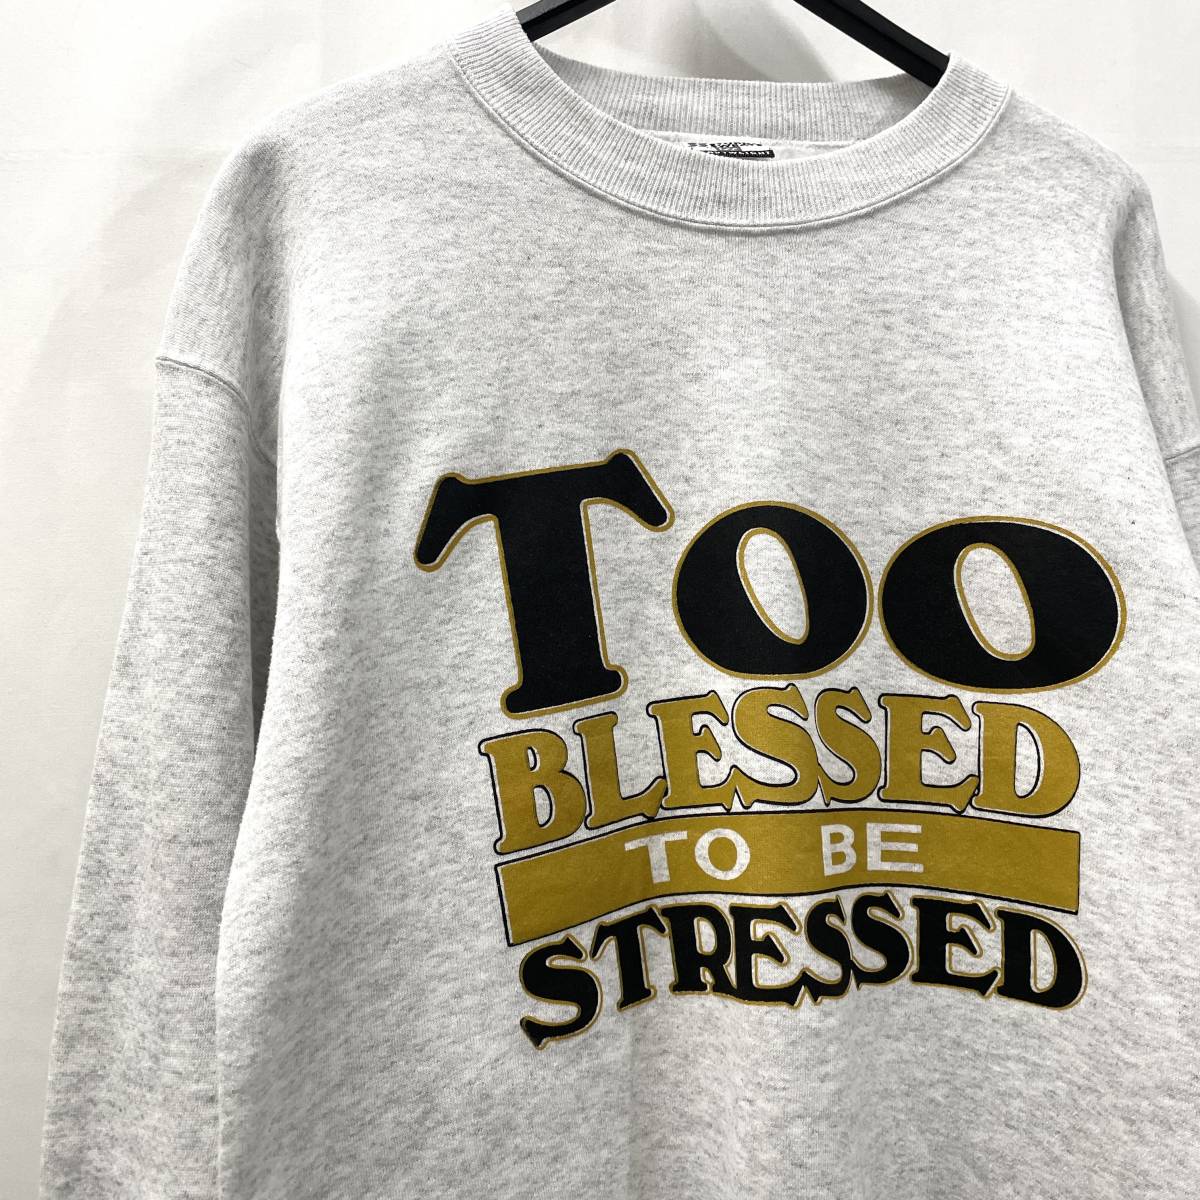 USA古着 90s Lee メッセージ プリント スウェット 霜降りグレー 90年代 TOO BLESSED TO BE STRESSED トレーナー ヴィンテージ オールド